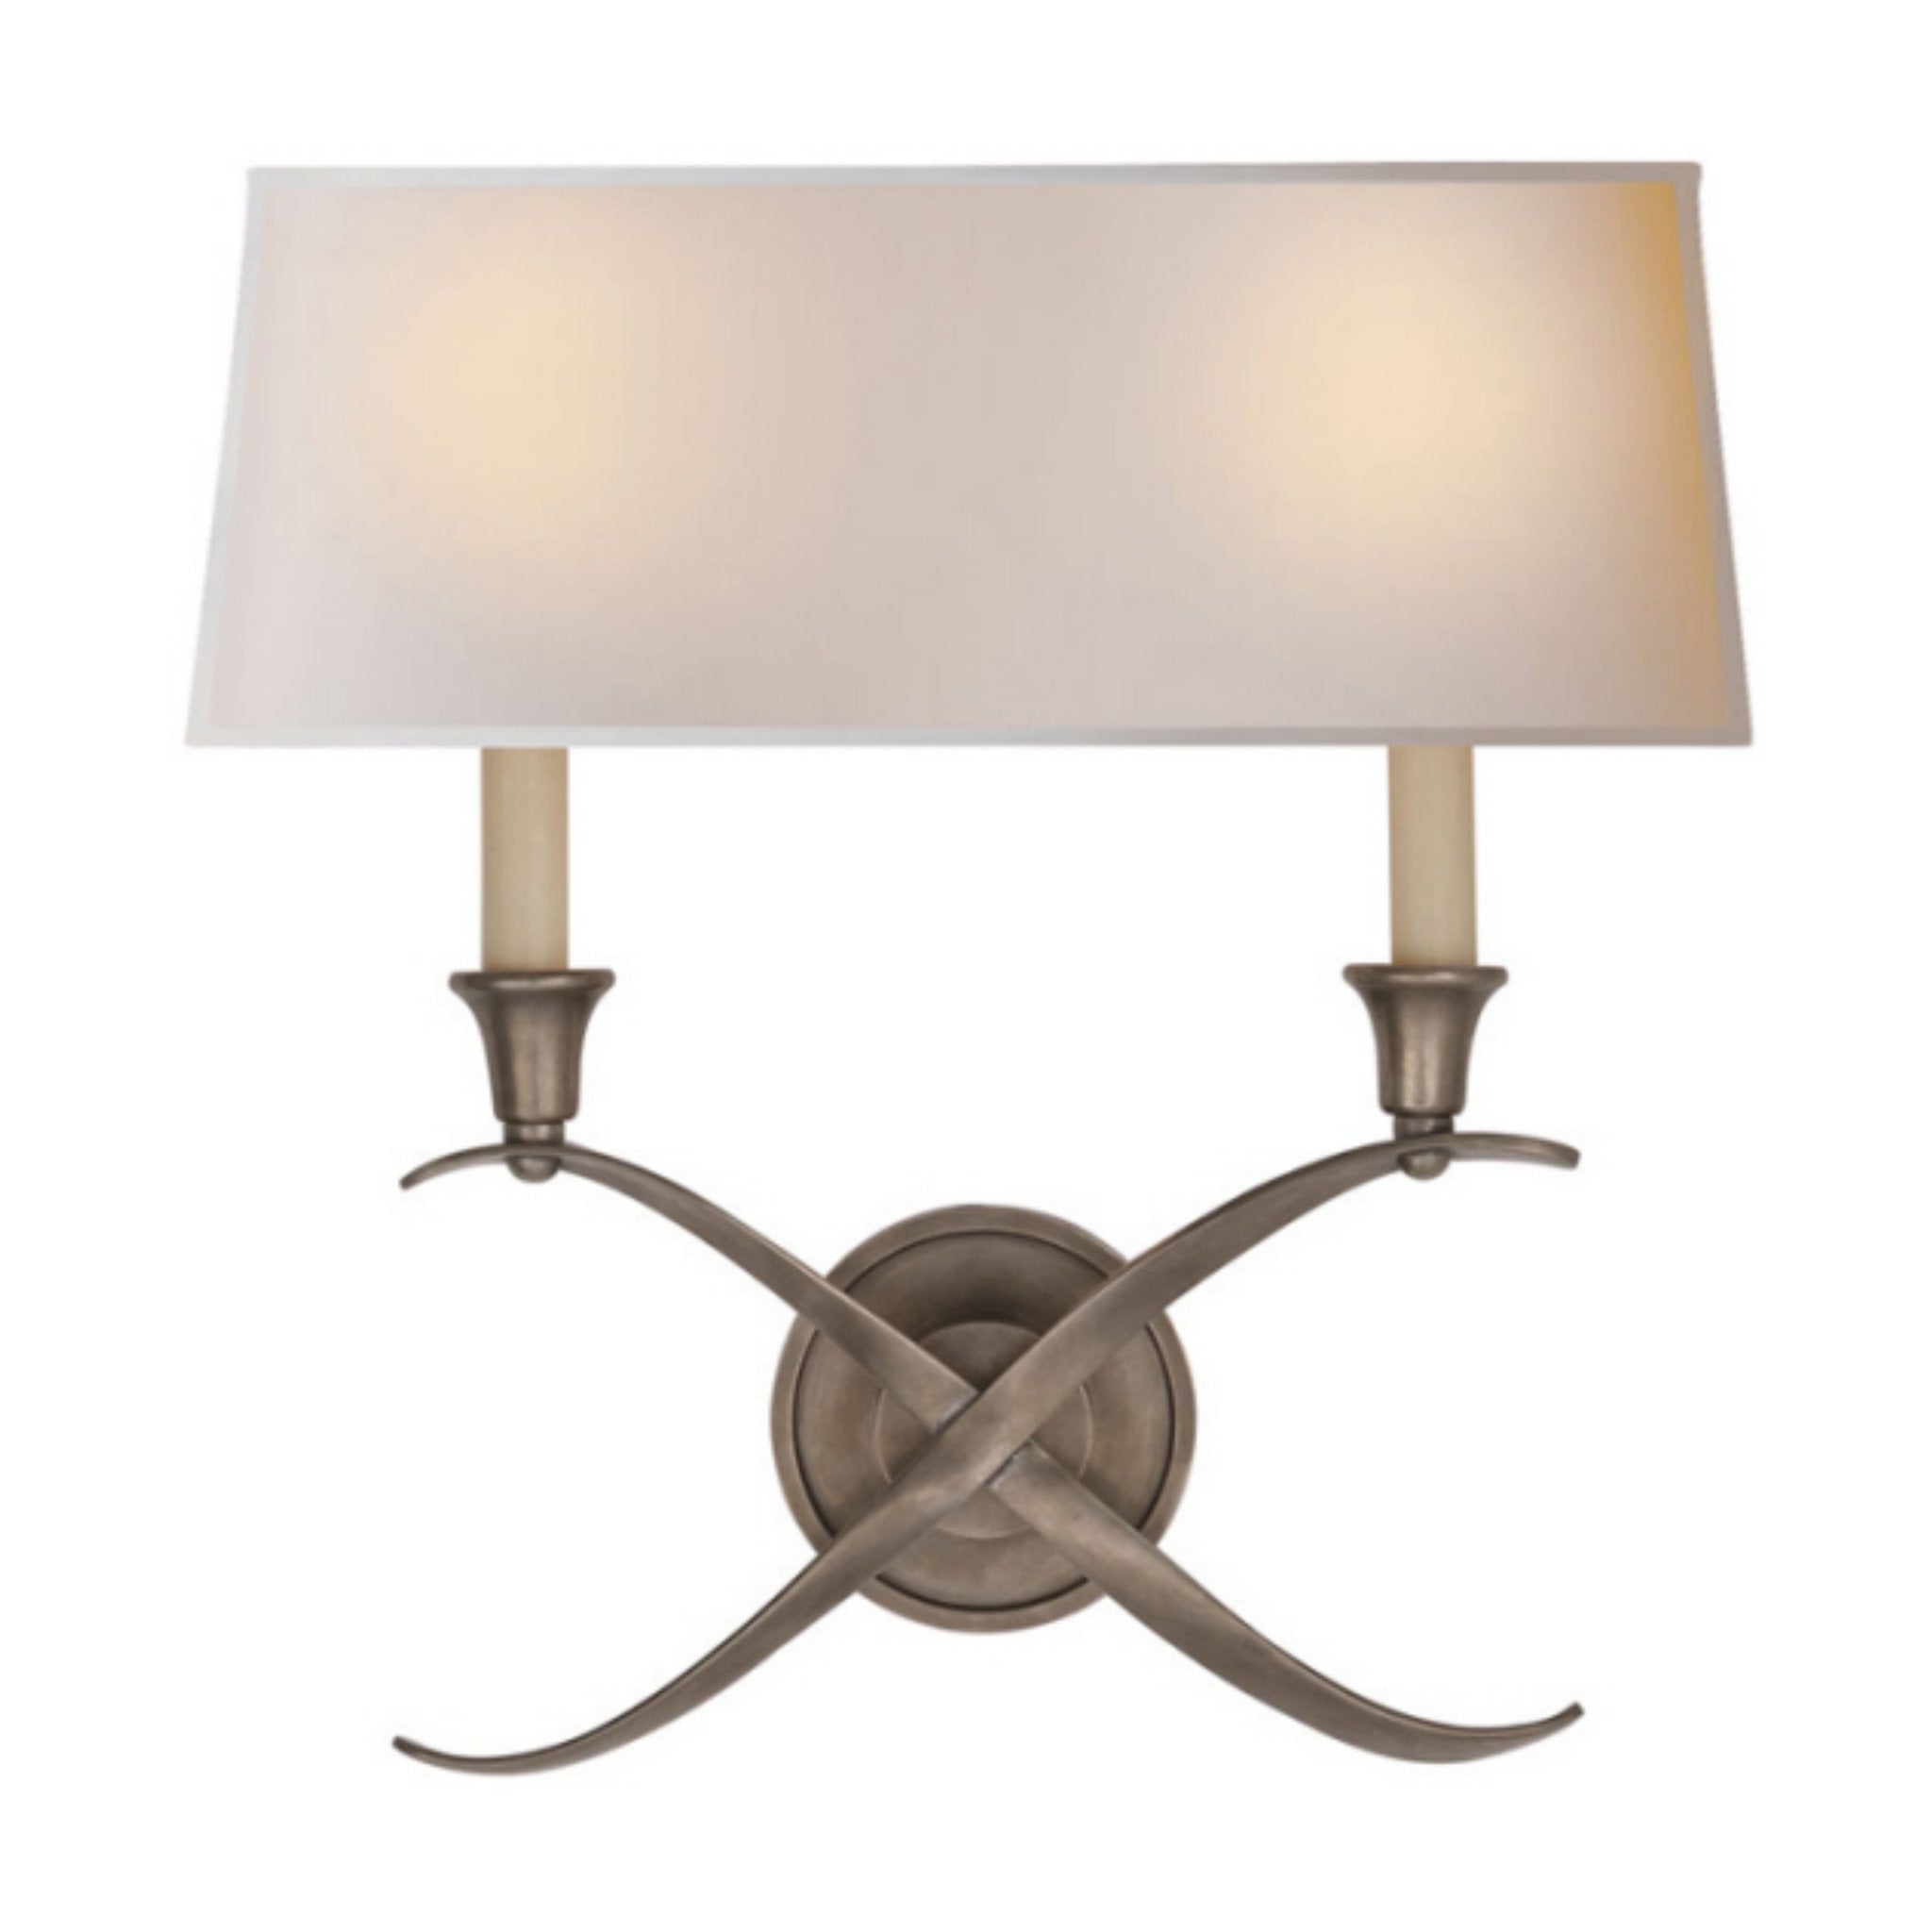 Chapman & Myers Cross Bouillotte Large Sconce in Antique Nickel with Natural Paper Shade